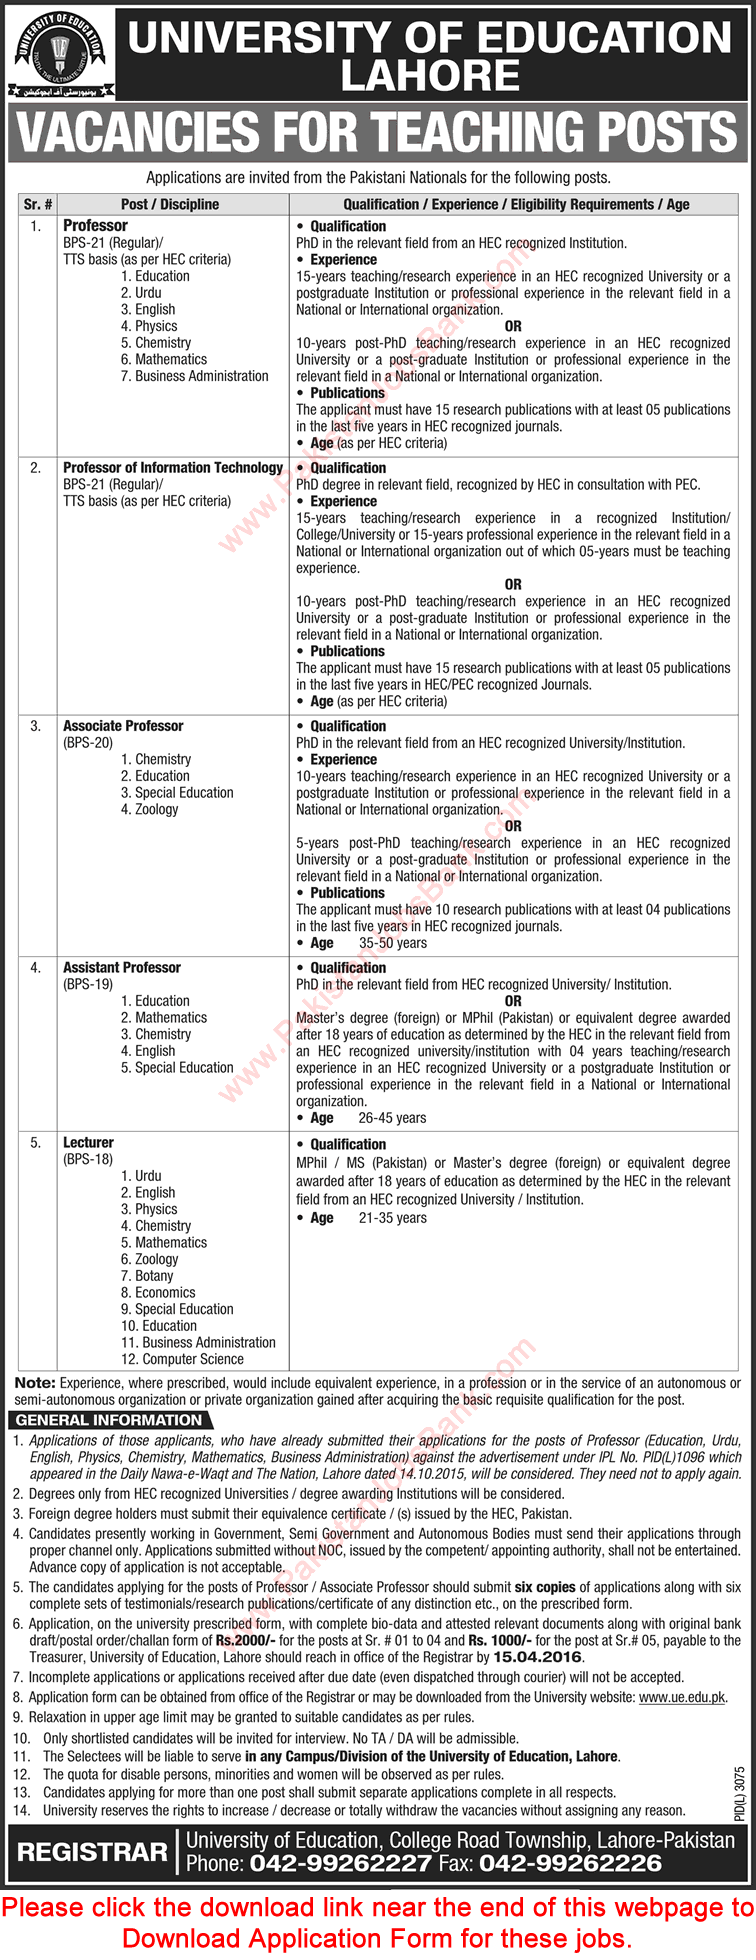 University of Education Lahore Jobs 2016 March / April Teaching Faculty Application Form Download Latest